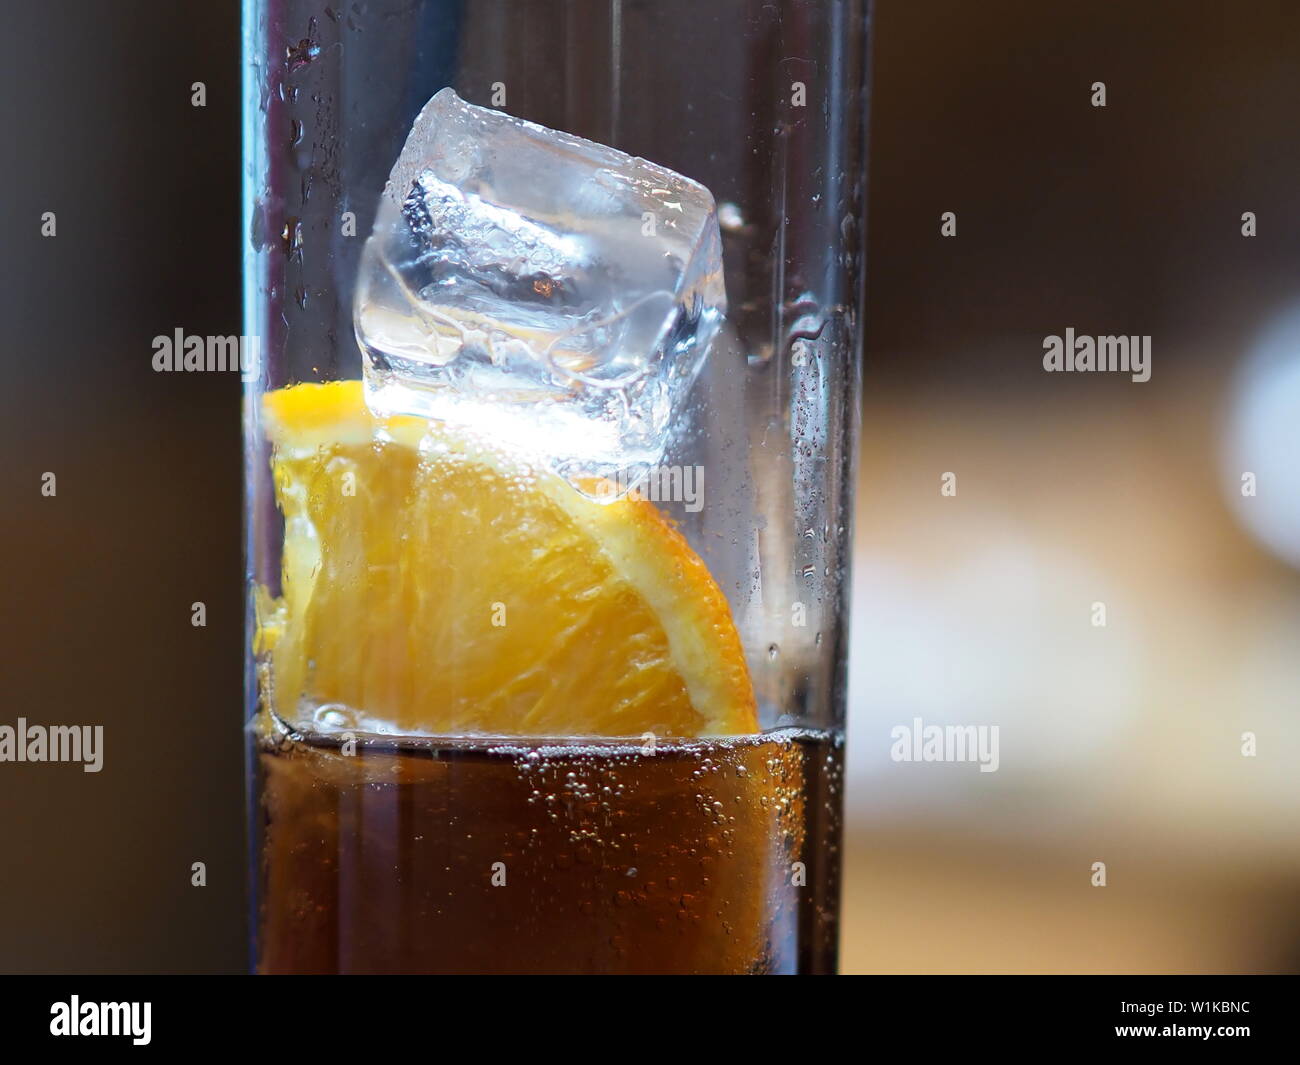 June 2019 -An Icy Cold Glass Of Sparkling Soft Drink With A Slice Of Orange Stock Photo